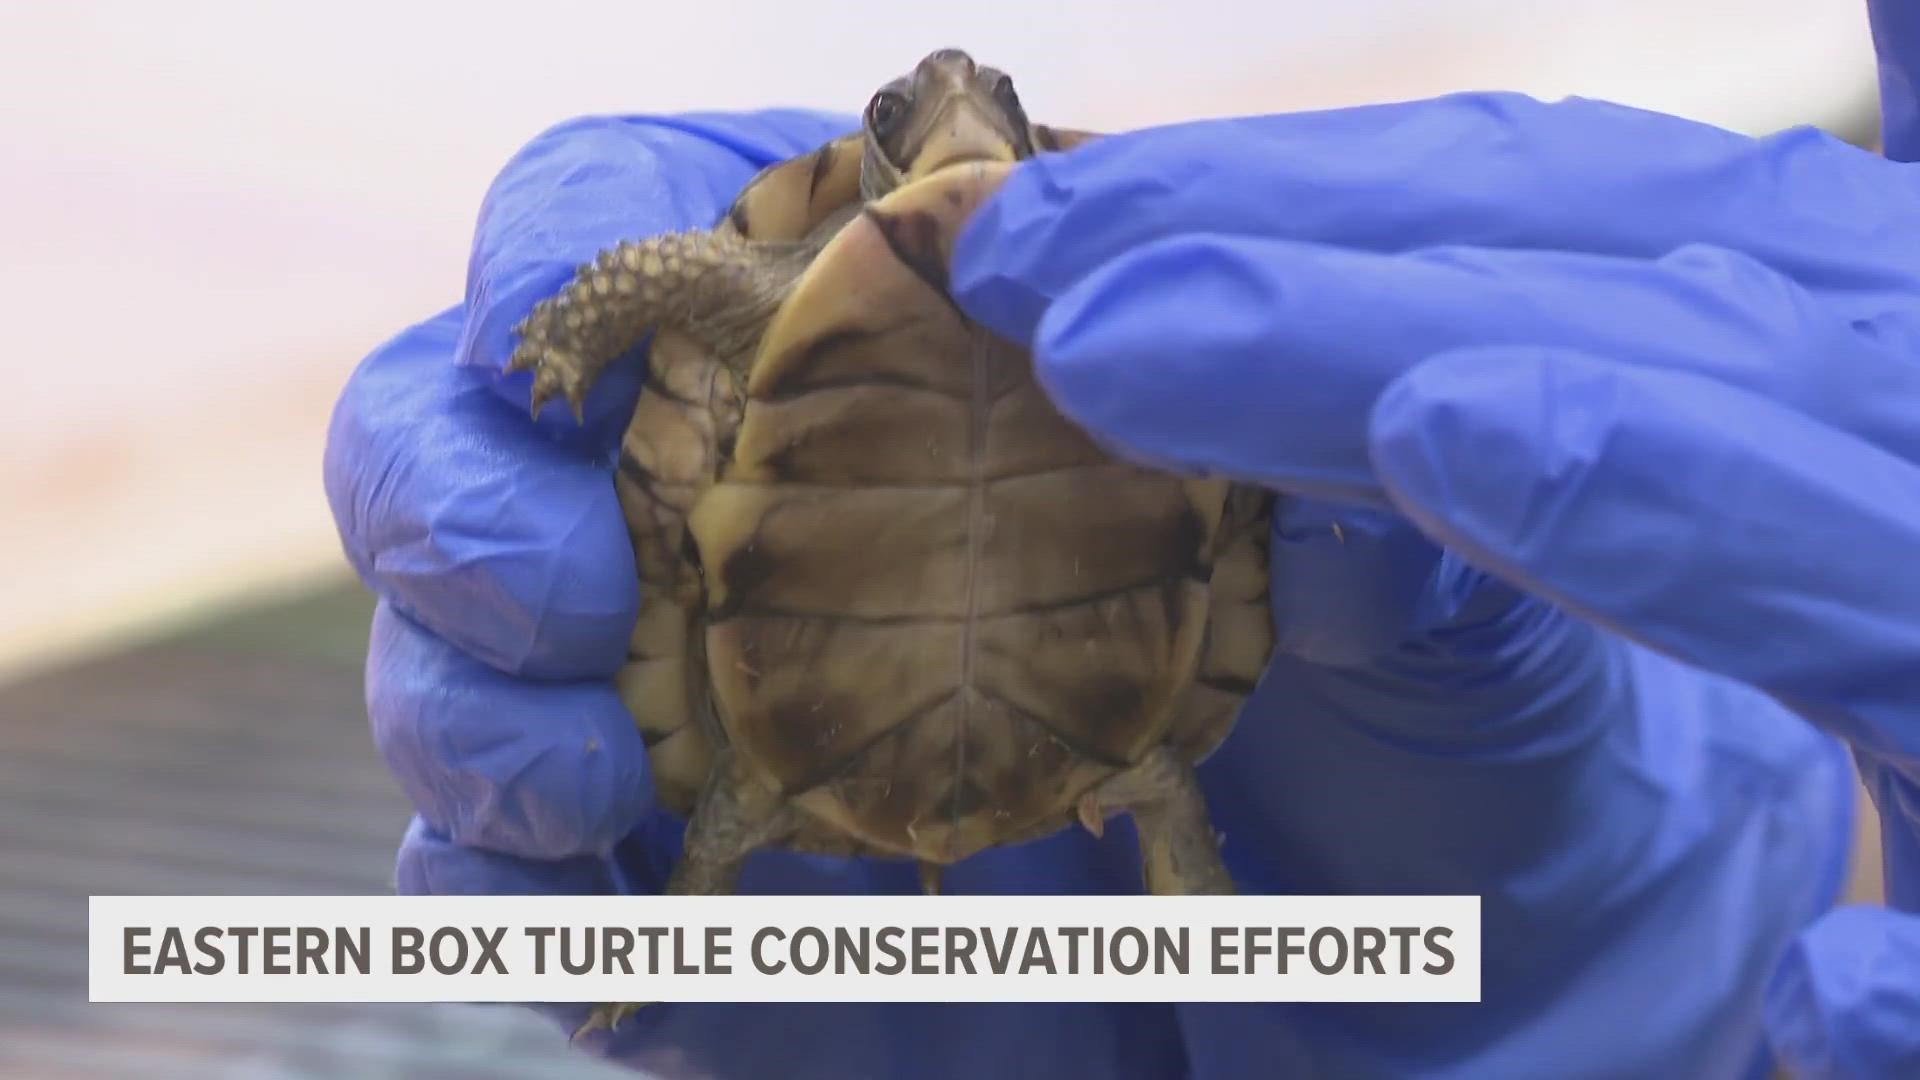 Meteorologist Michael Behrens explains how John Ball Zoo helps to conserve Eastern Box Turtle populations here in Michigan!